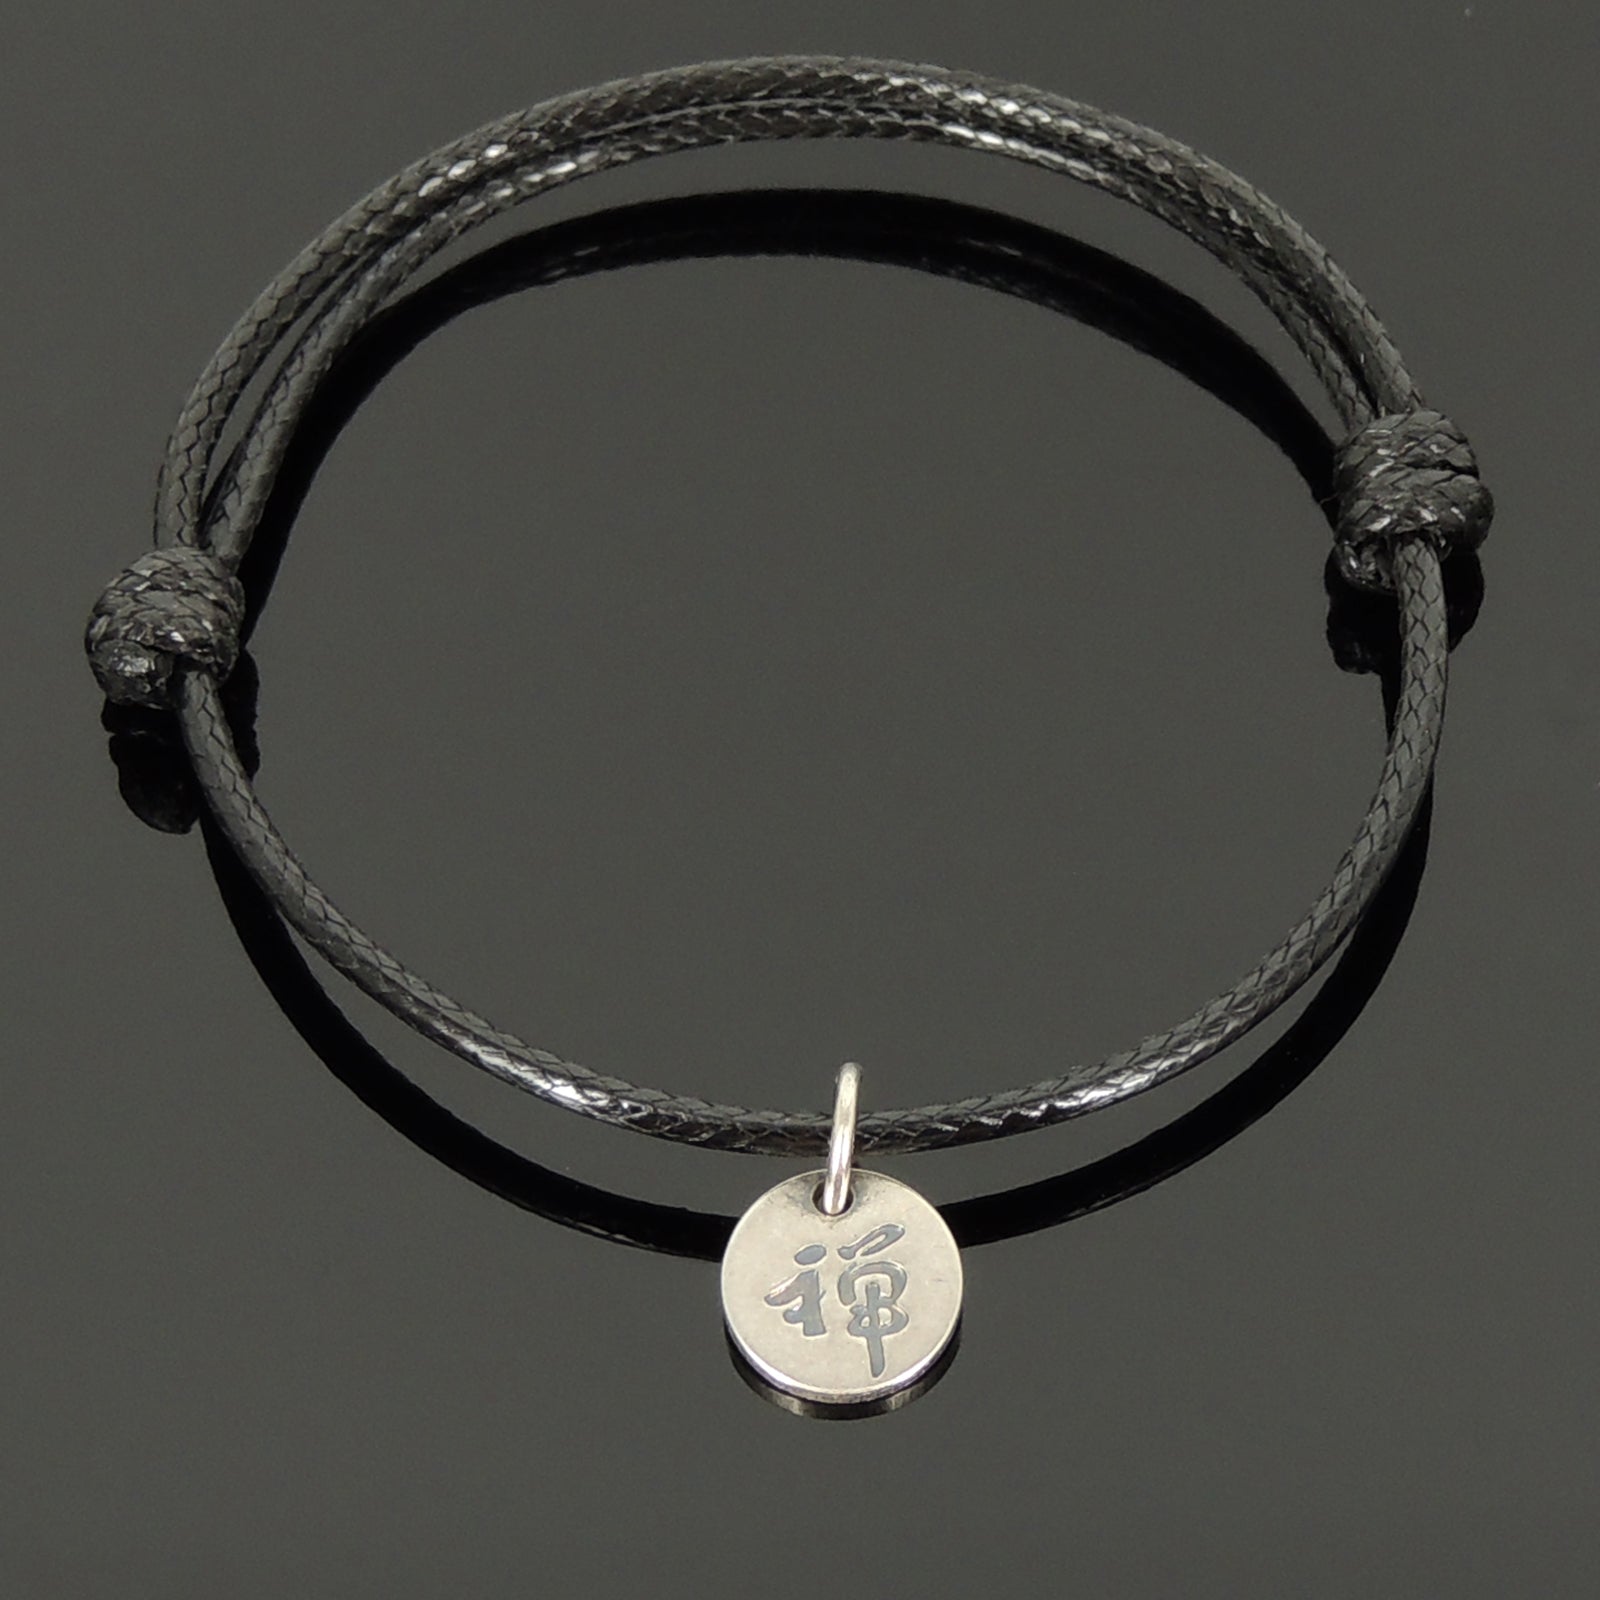 Black Wax Rope Charm Bracelet | Chinese Calligraphy Symbol 禅 "Zen" | Unplated Genuine 925 Sterling Silver